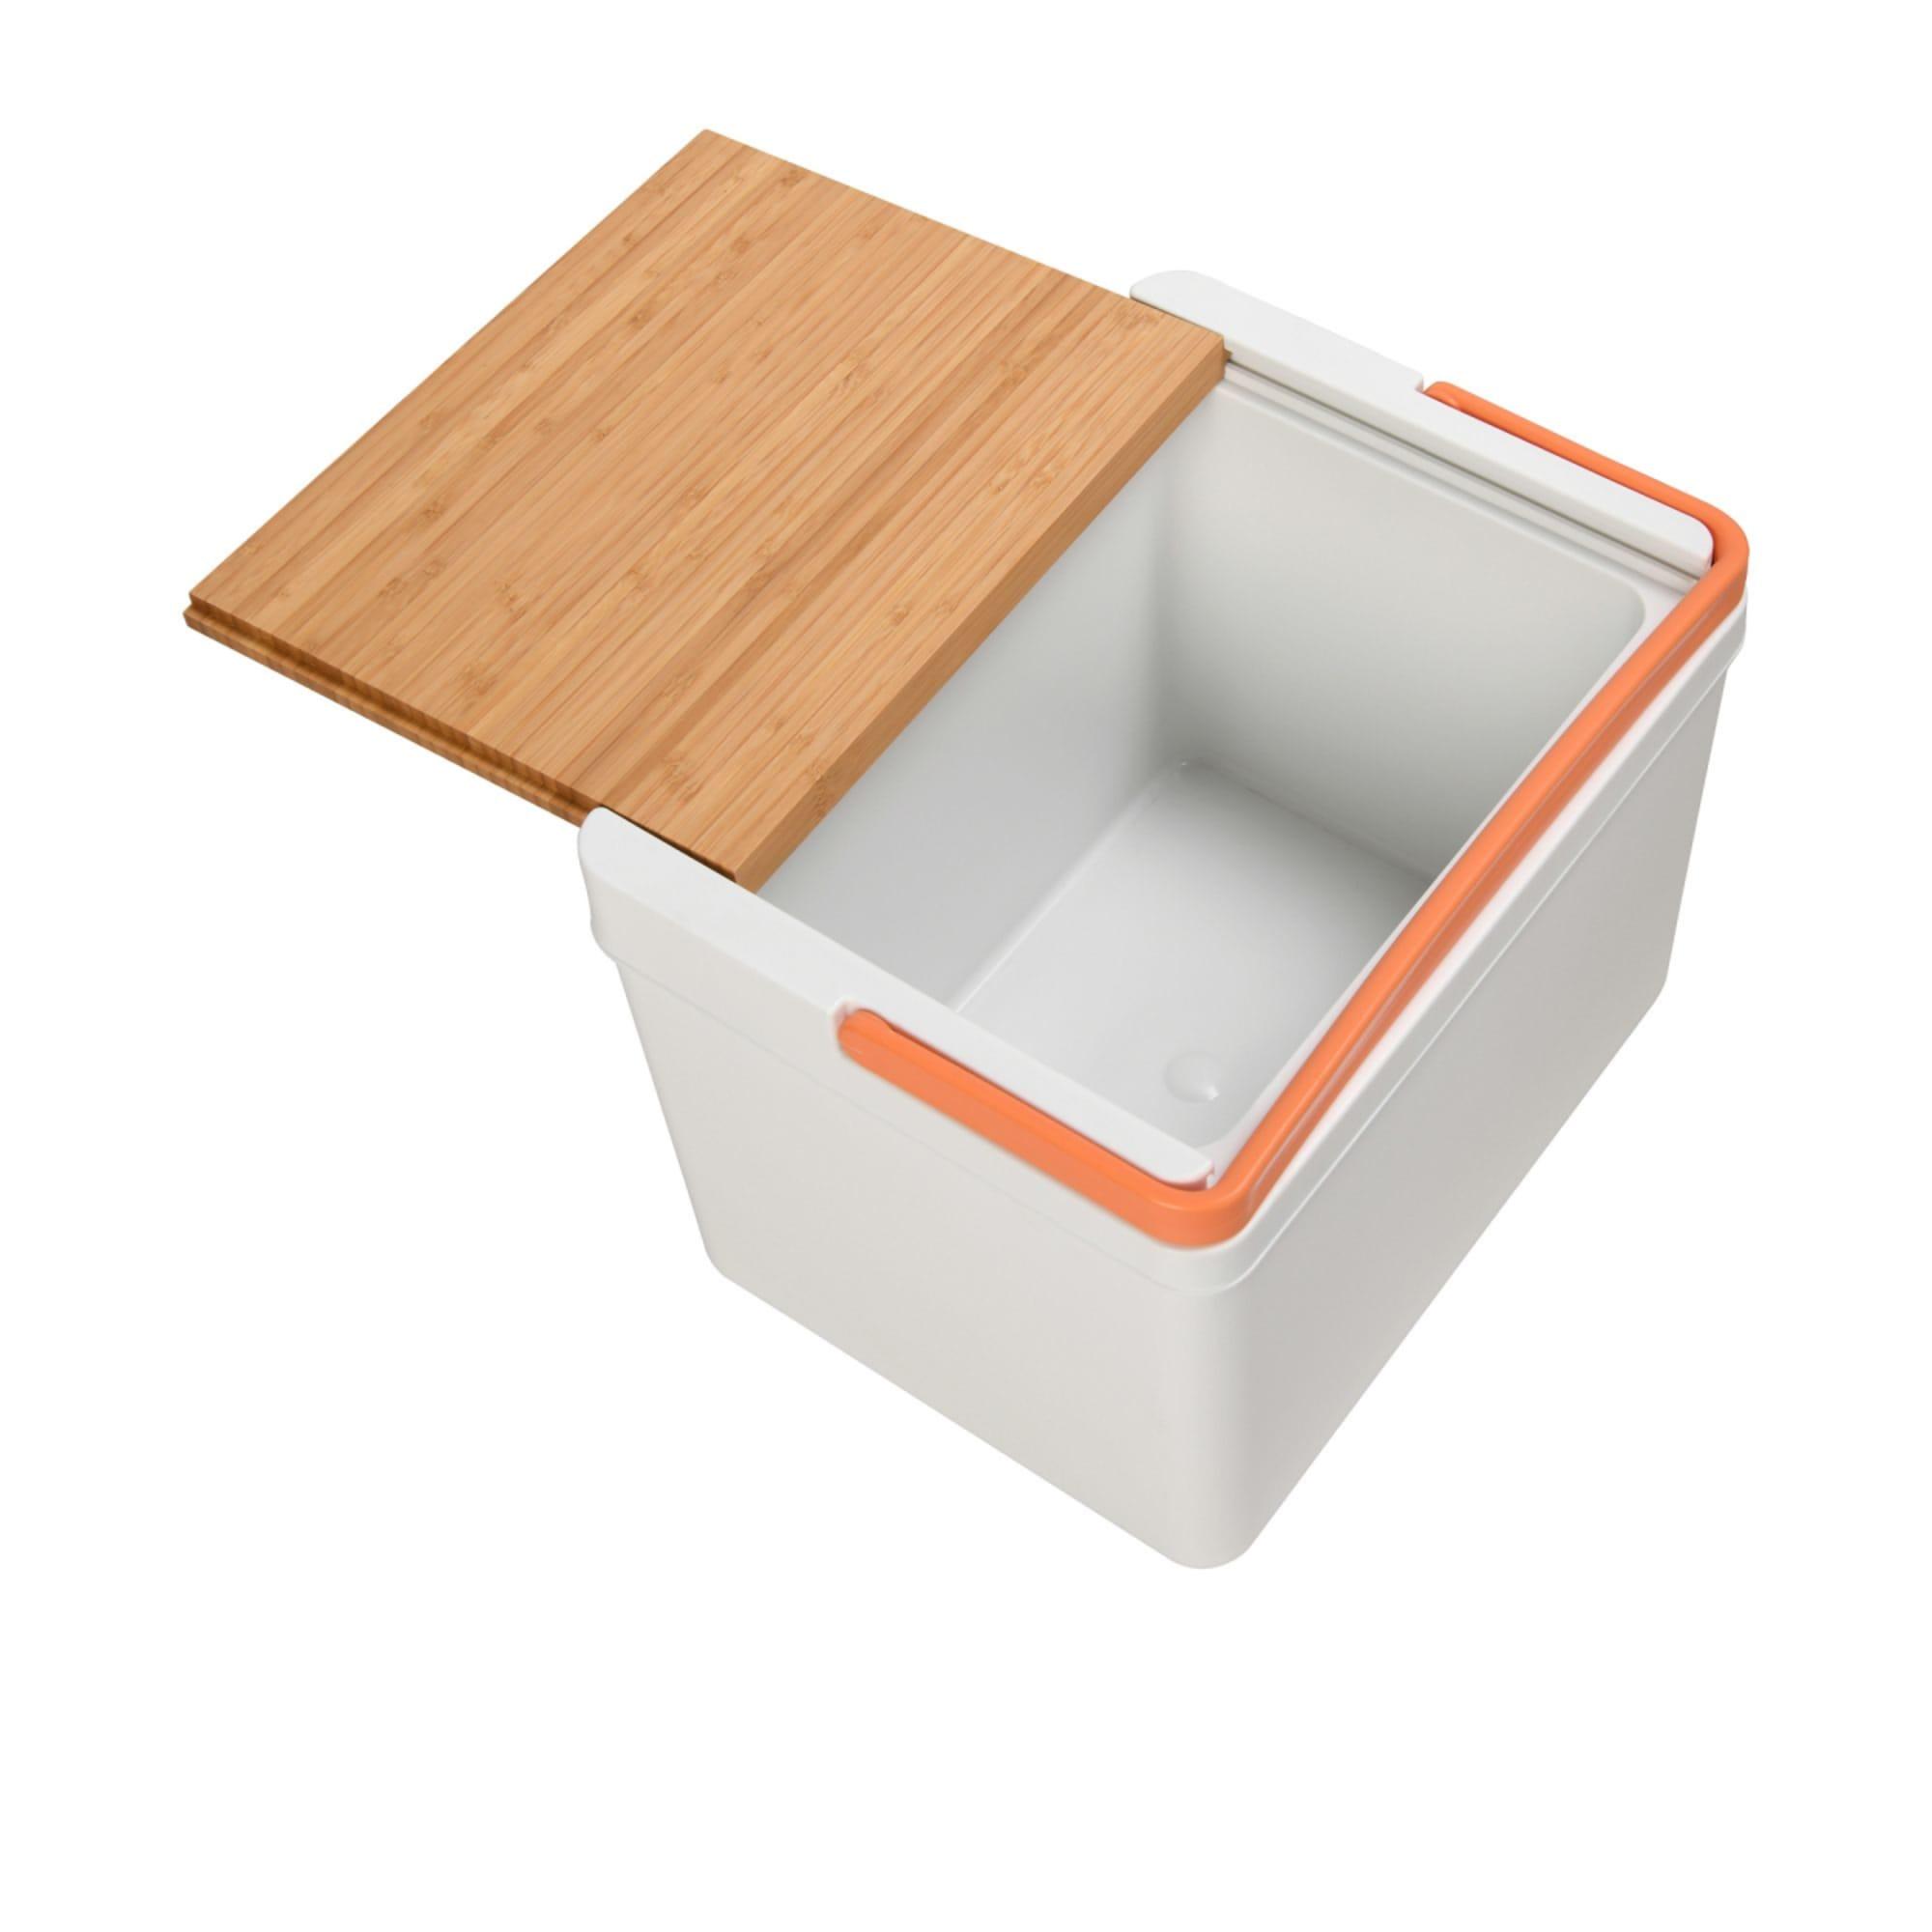 Vibes Portable Cooler Box With Bamboo Lid White Peach Image 4